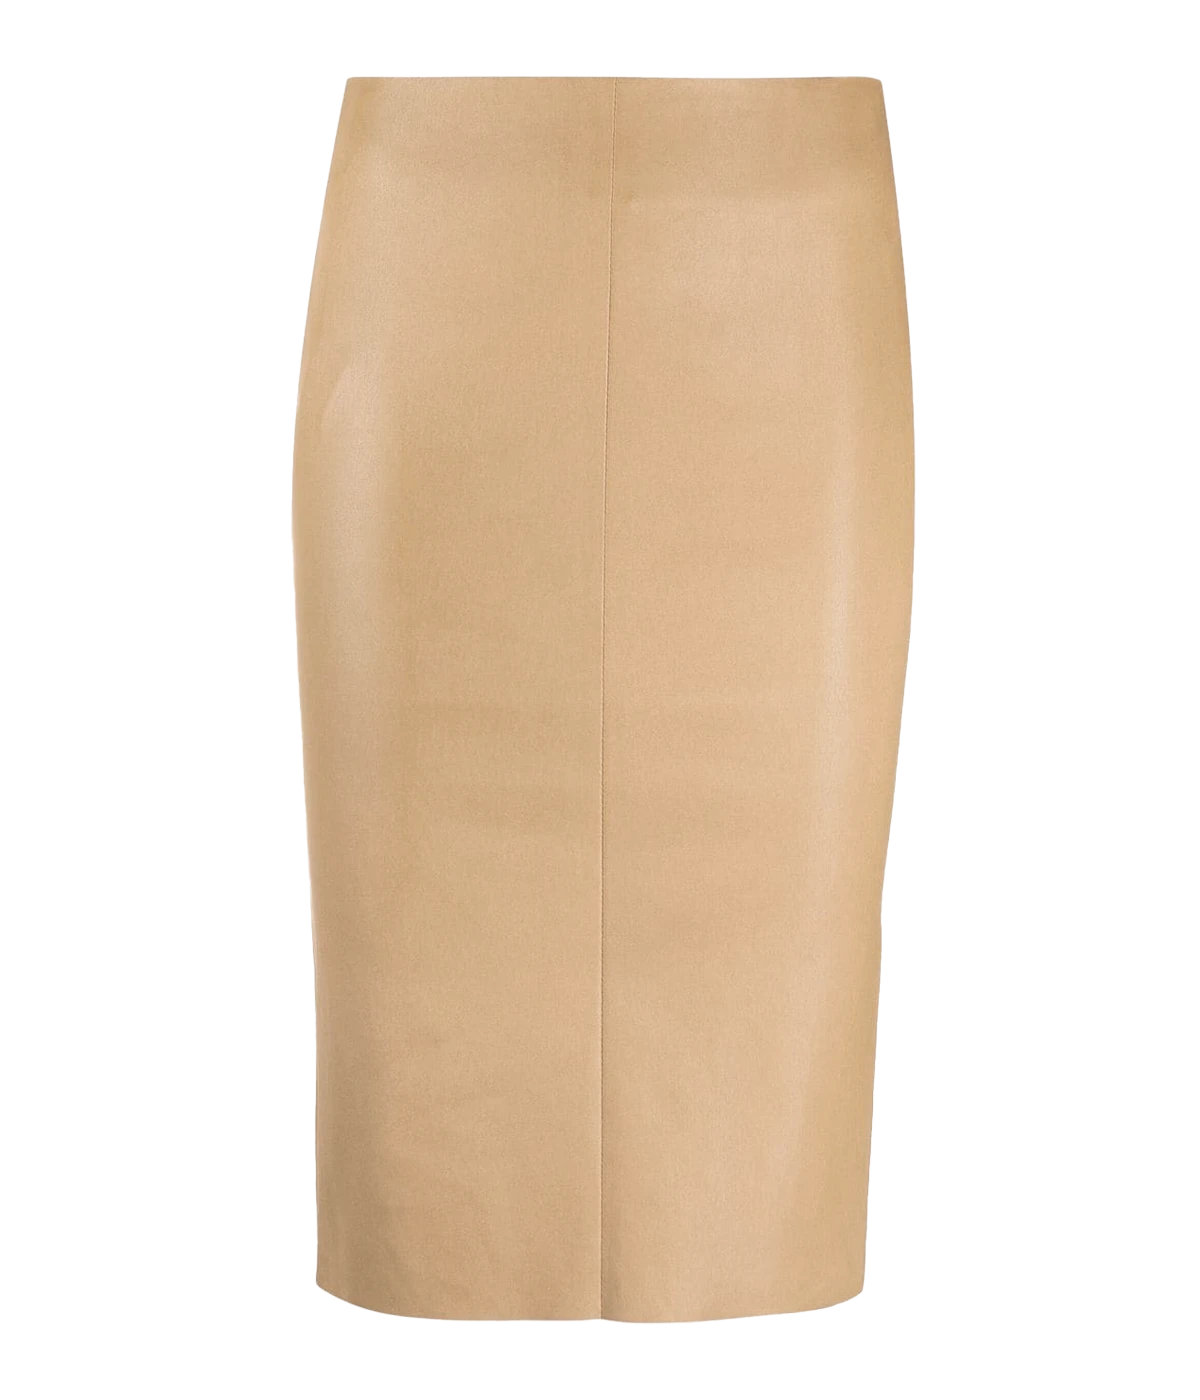 Pencil Skirt in Oatmeal